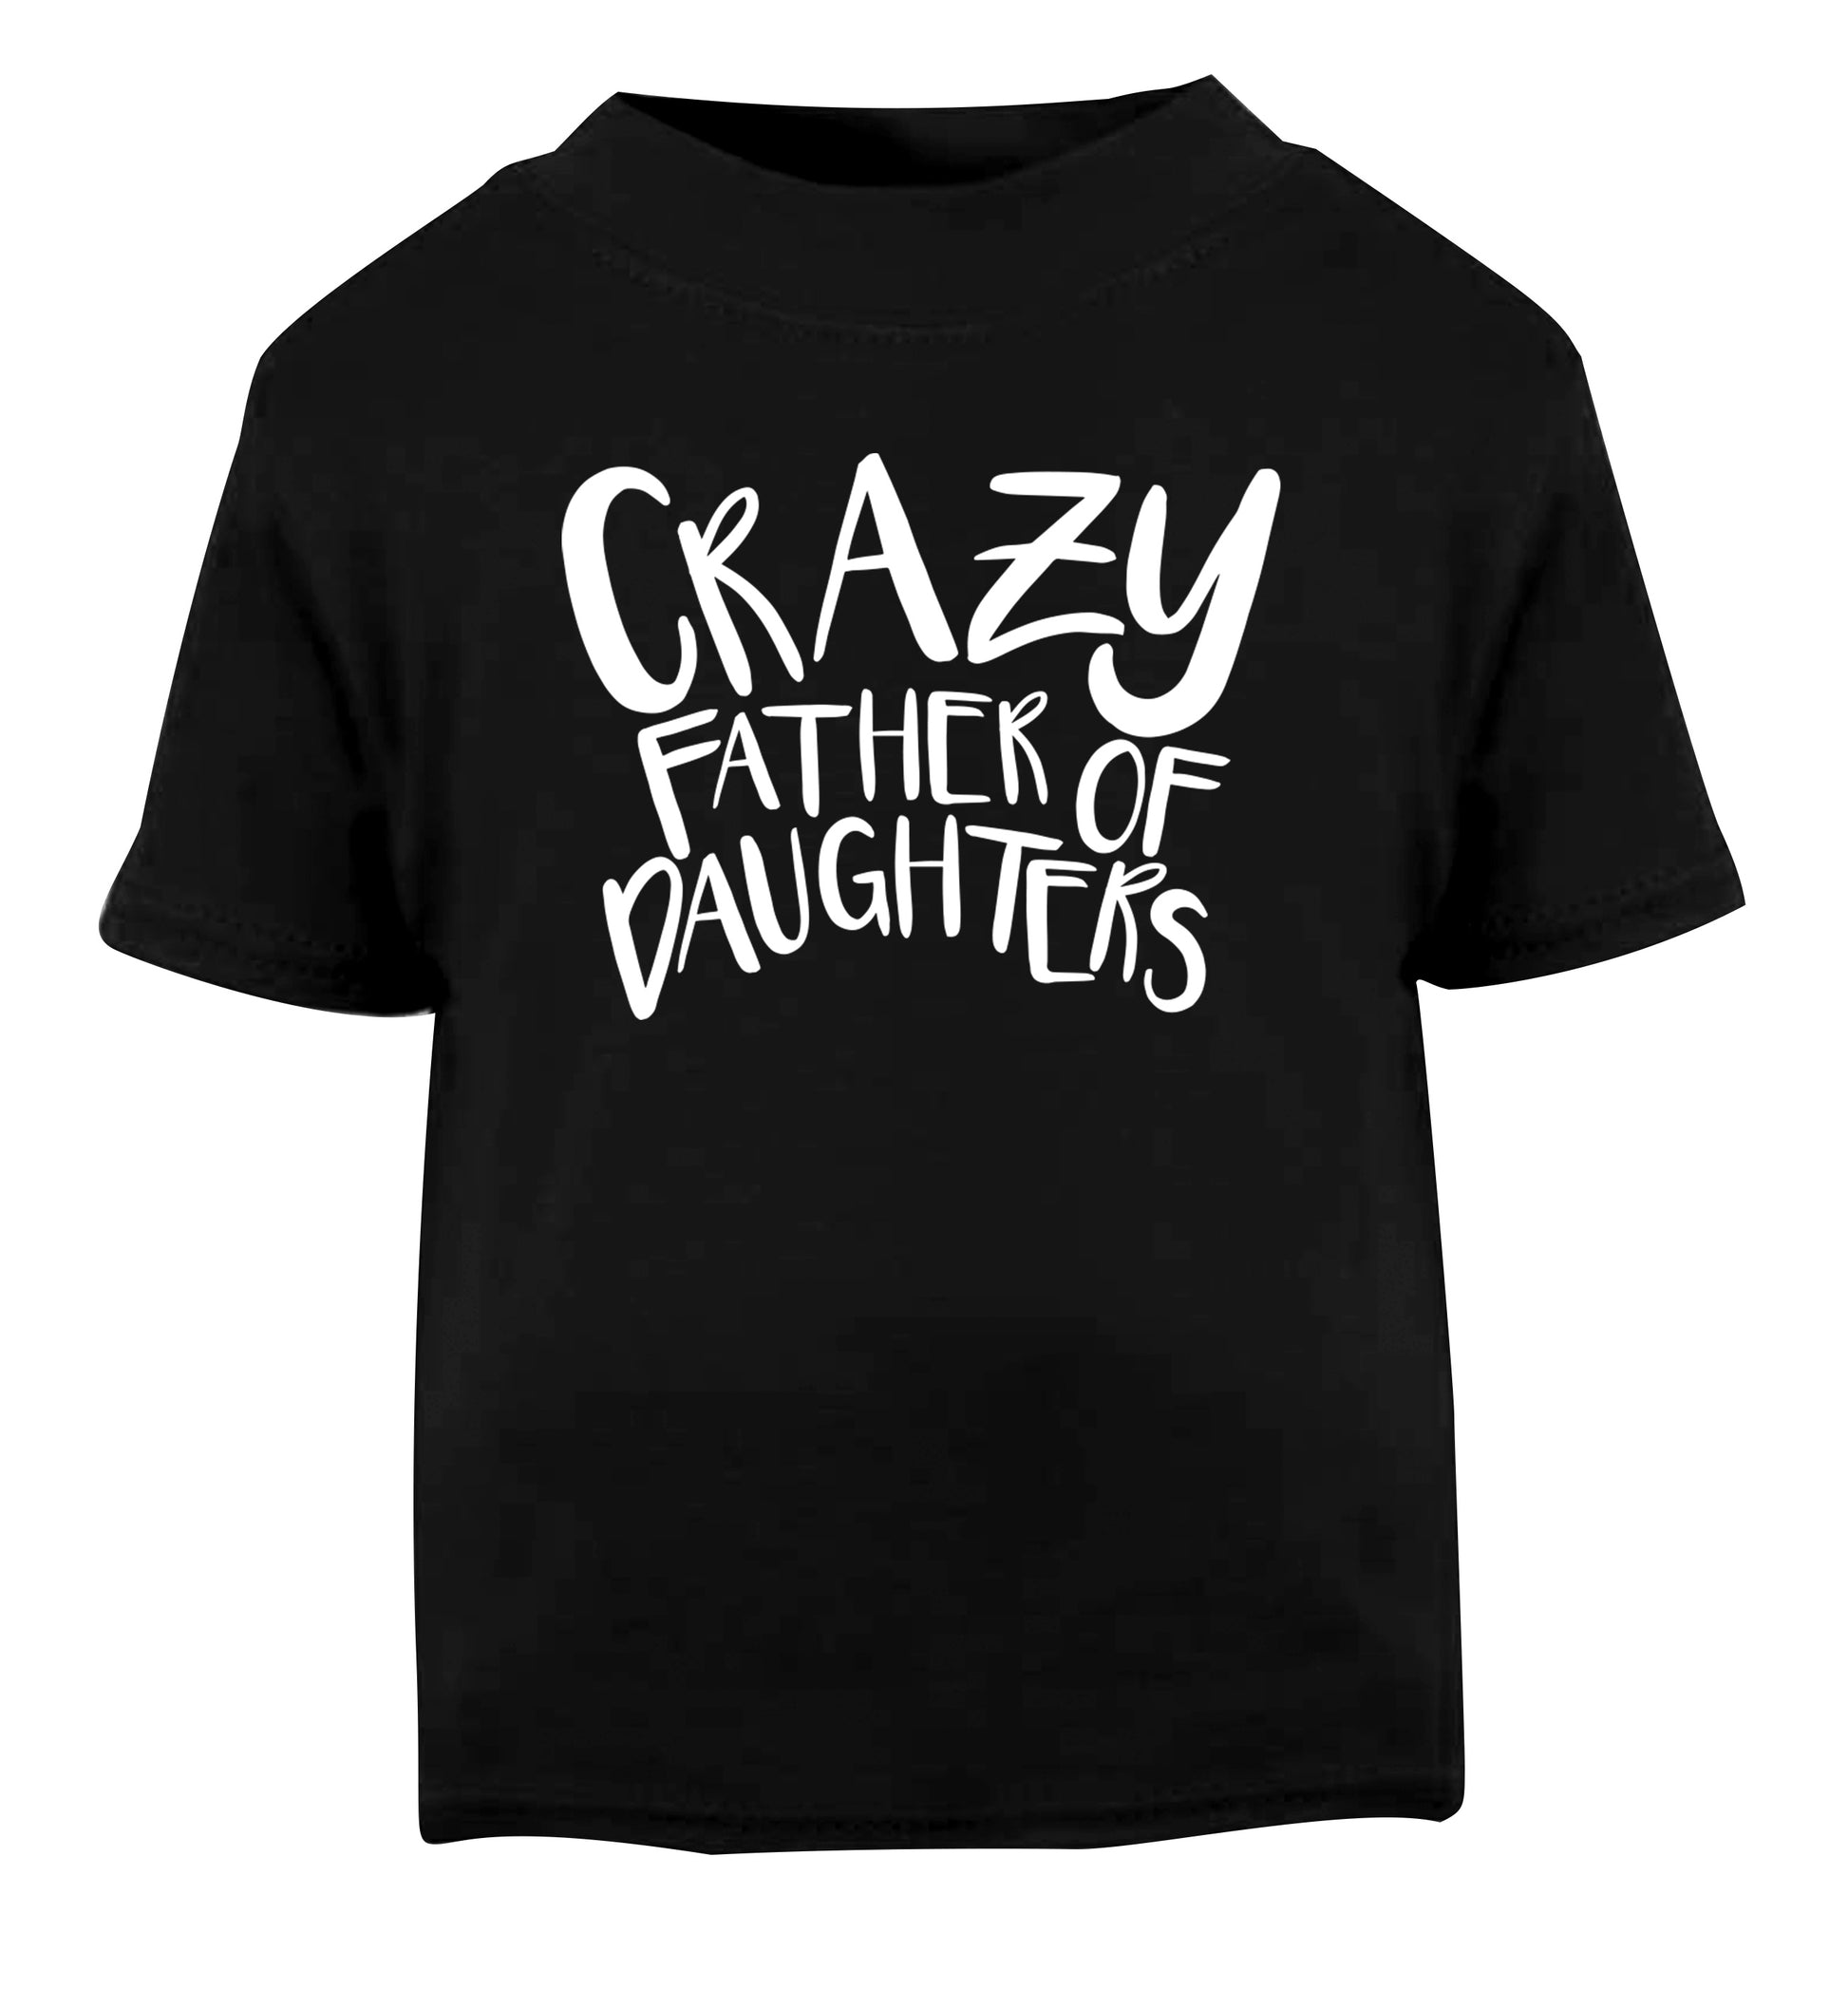 Crazy father of daughters Black Baby Toddler Tshirt 2 years